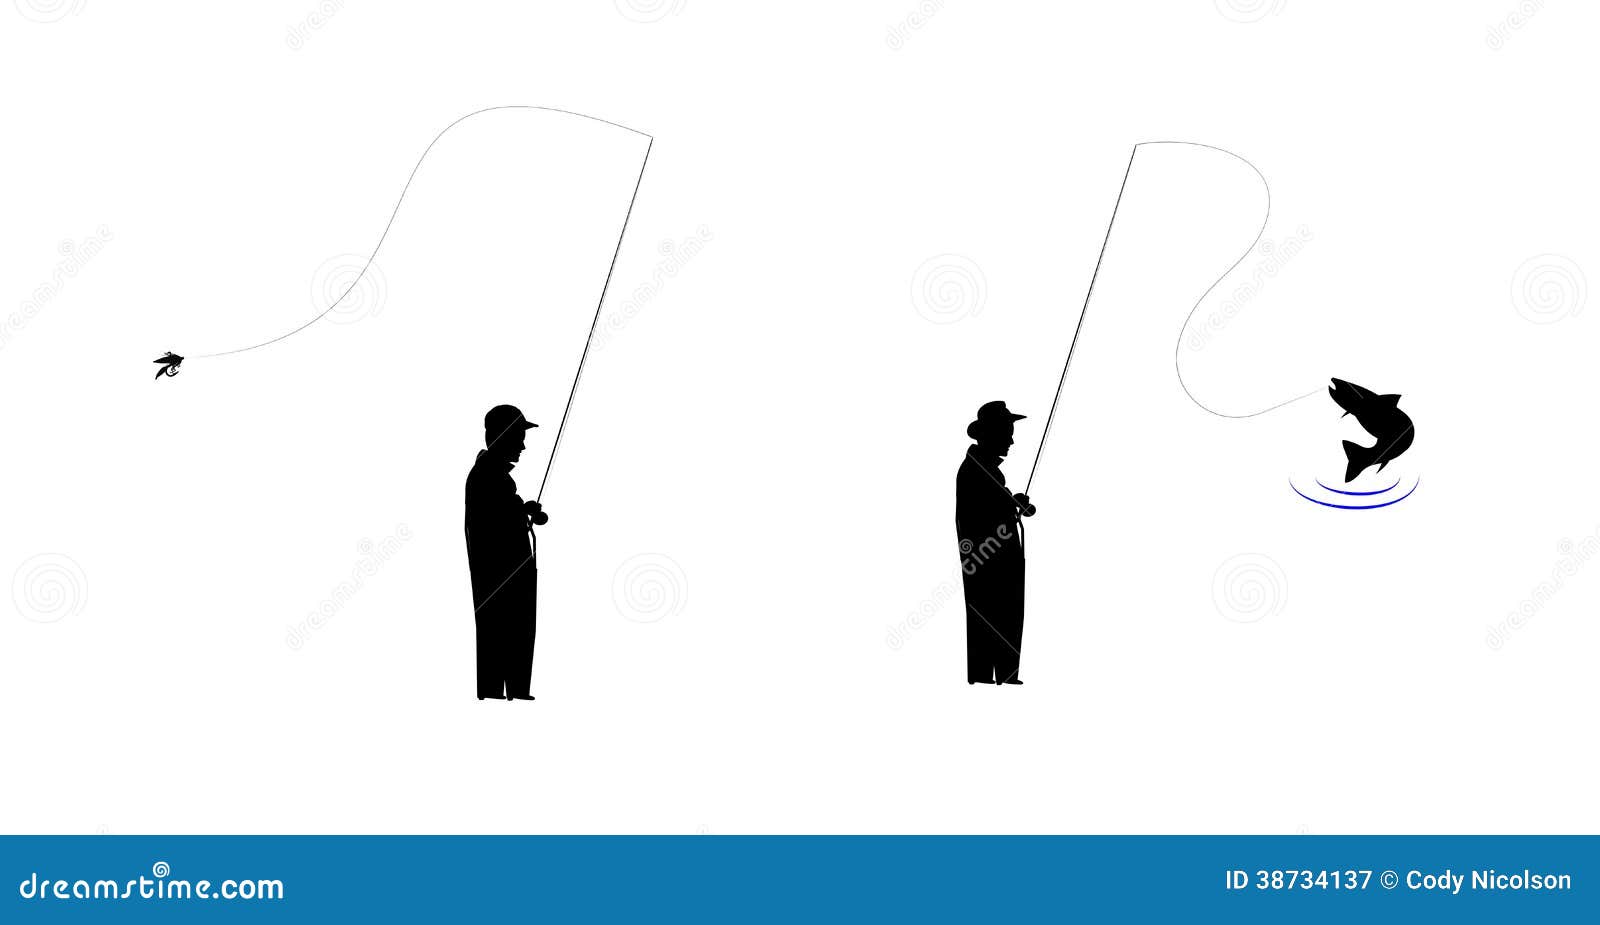 https://thumbs.dreamstime.com/z/fly-fishing-two-men-hip-waders-different-positions-one-catching-fish-silhouette-38734137.jpg